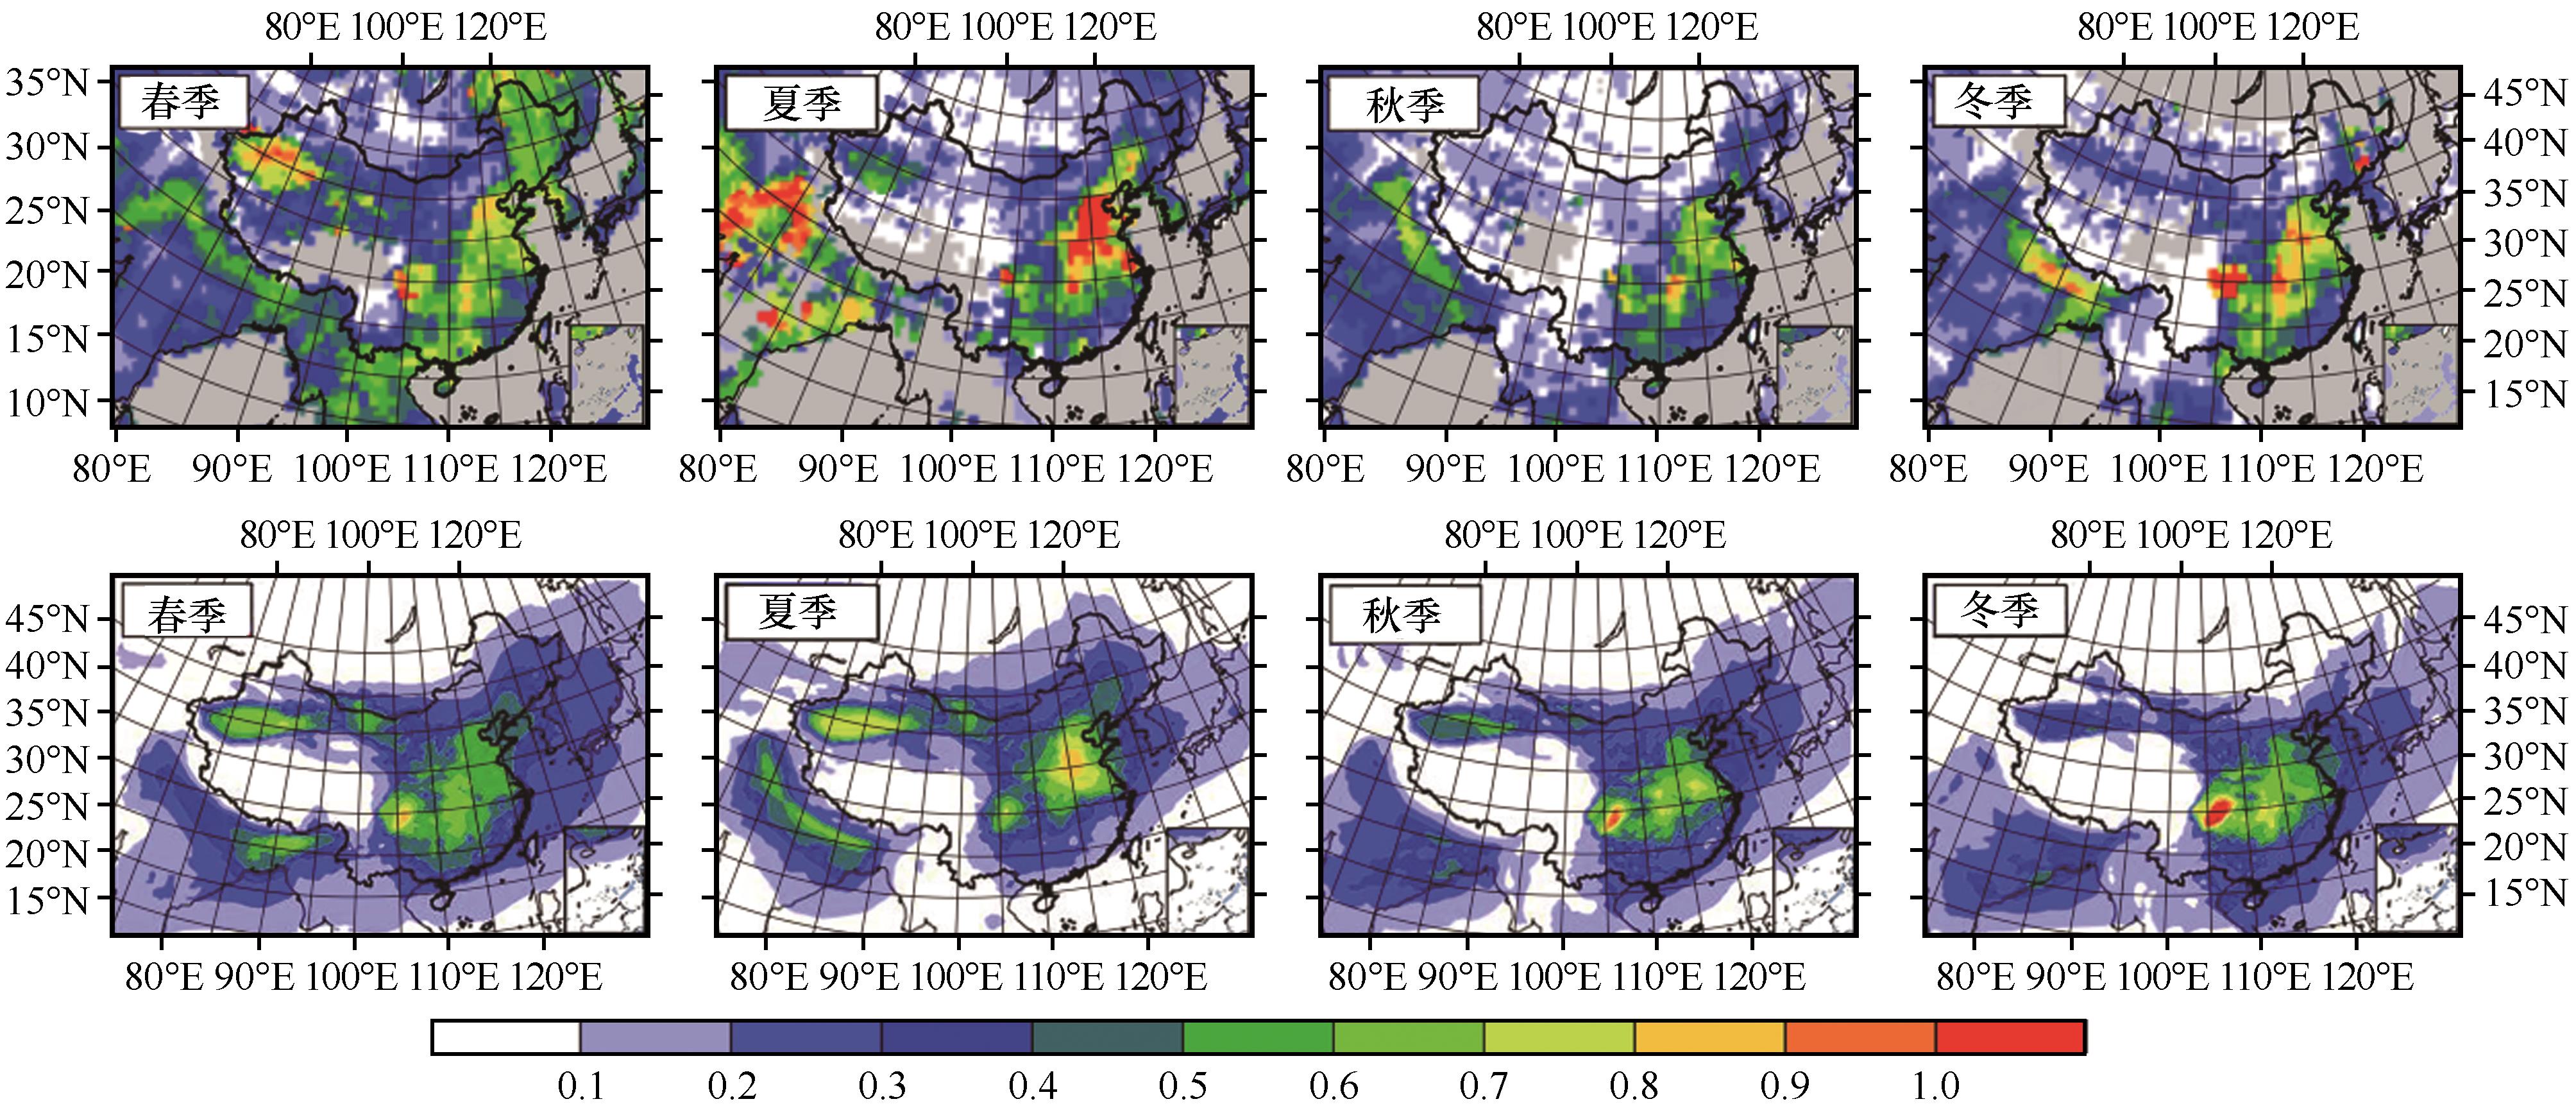 Influence of dust aerosol on land surface diurnal temperature range over East Asia Simulated with the WRF-Chem model